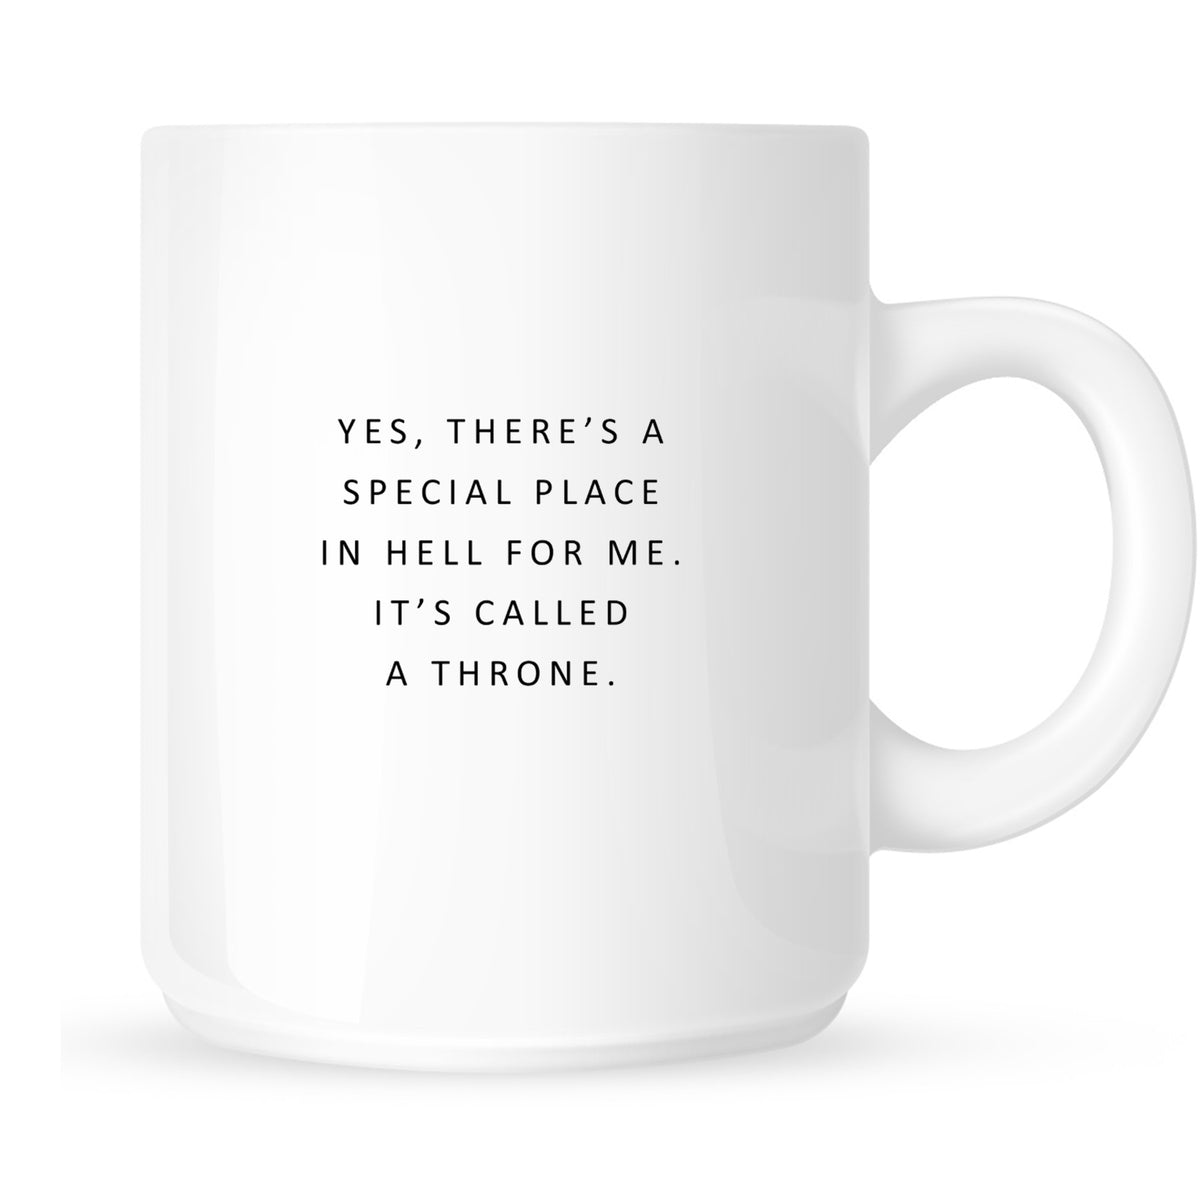 Mug - Yes, There is a Special Place in Hell for Me. It's Called a Throne.